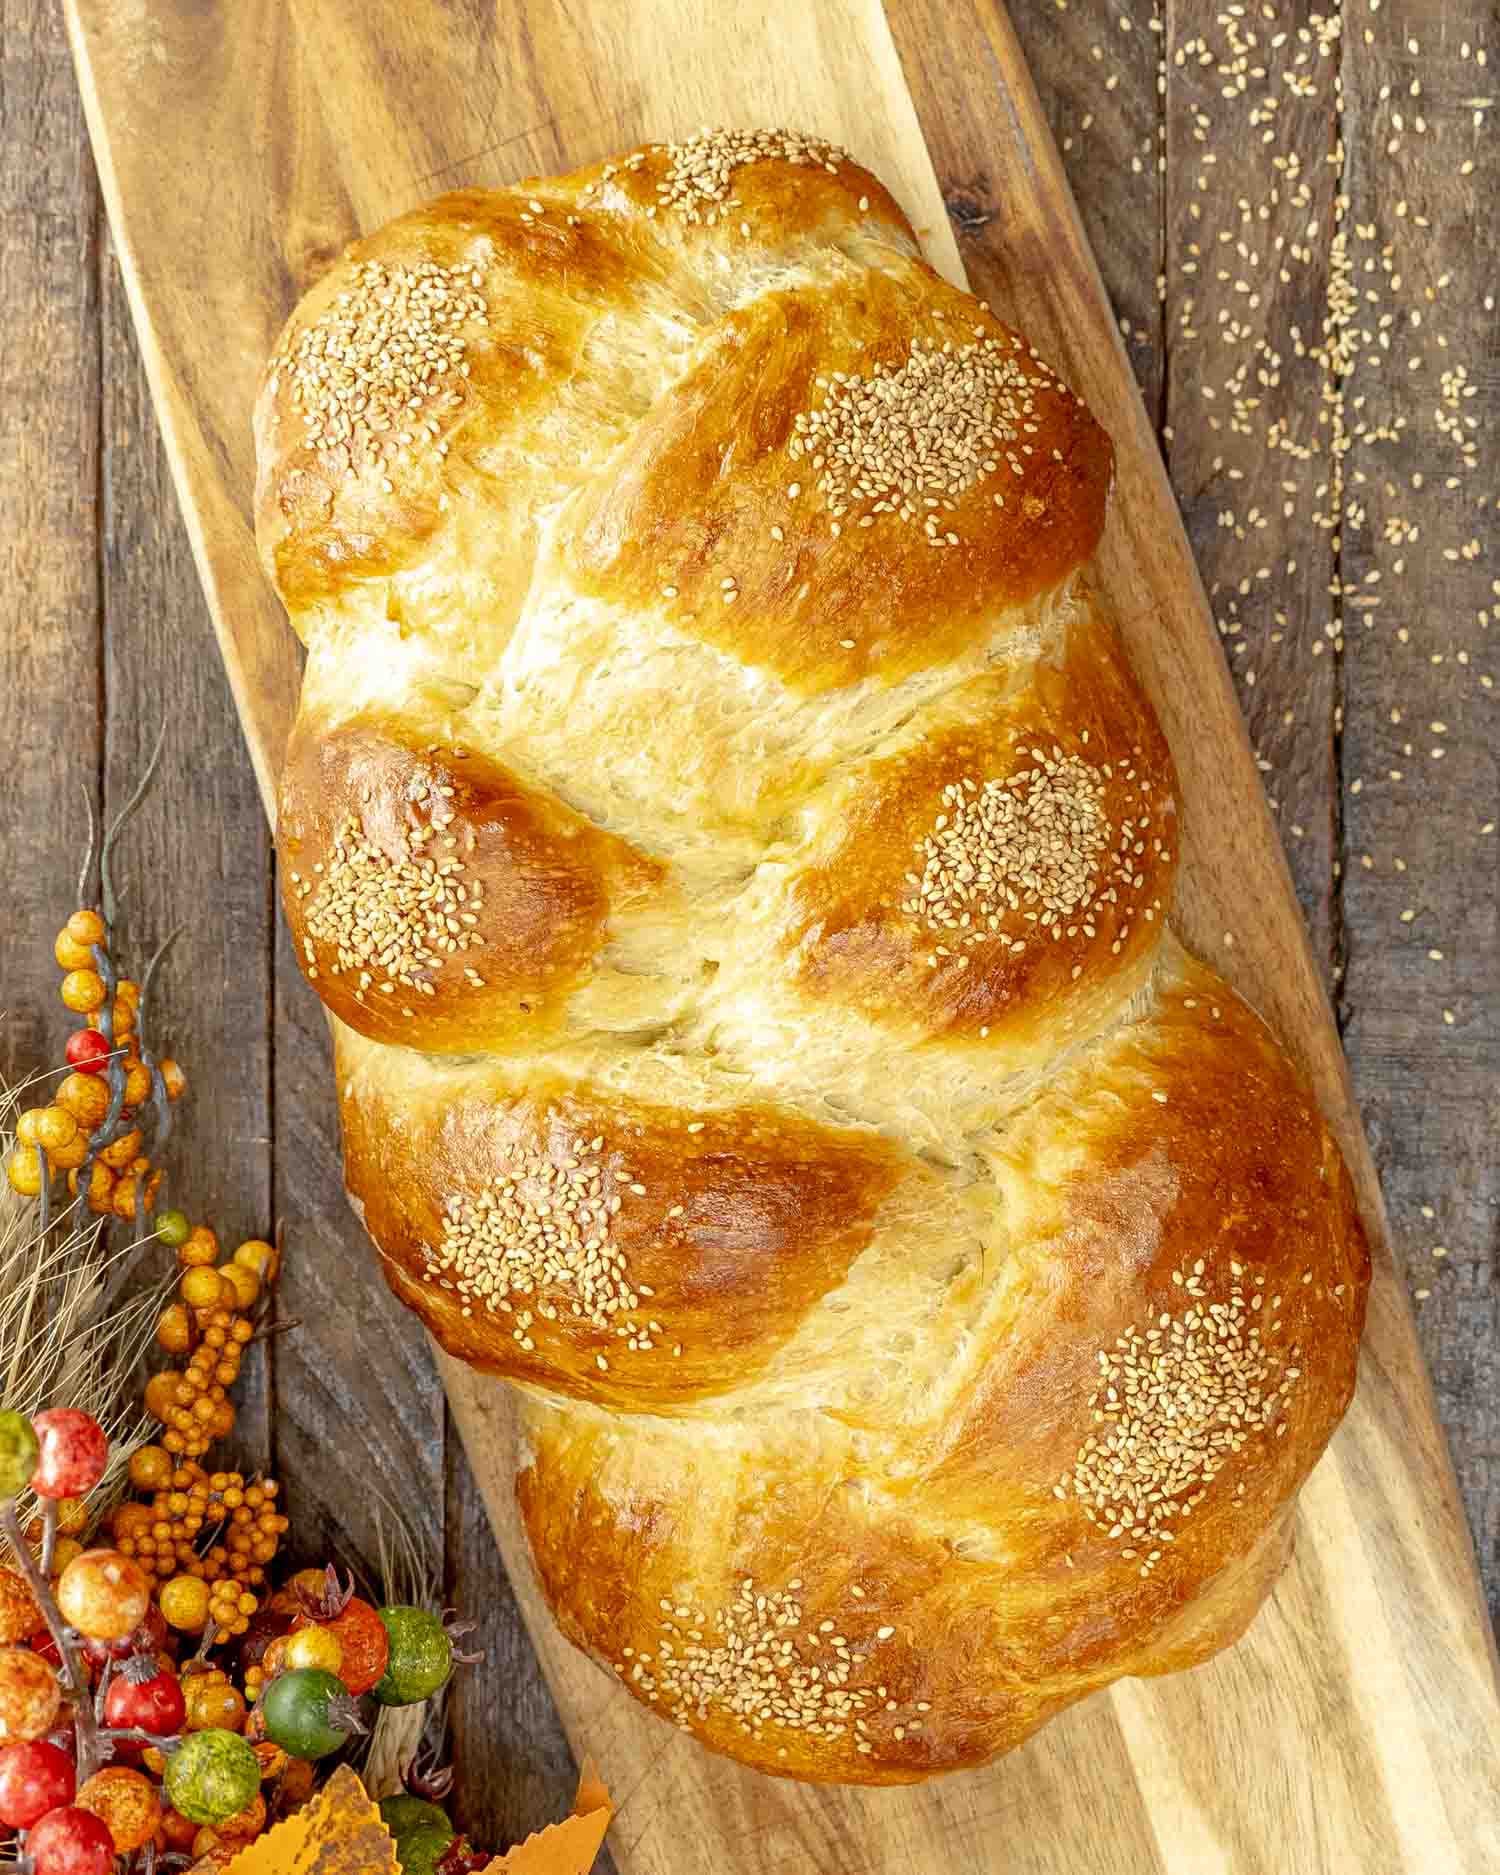 Golden-brown braided challah bread sprinkled with sesame seeds on a wooden paddle board.